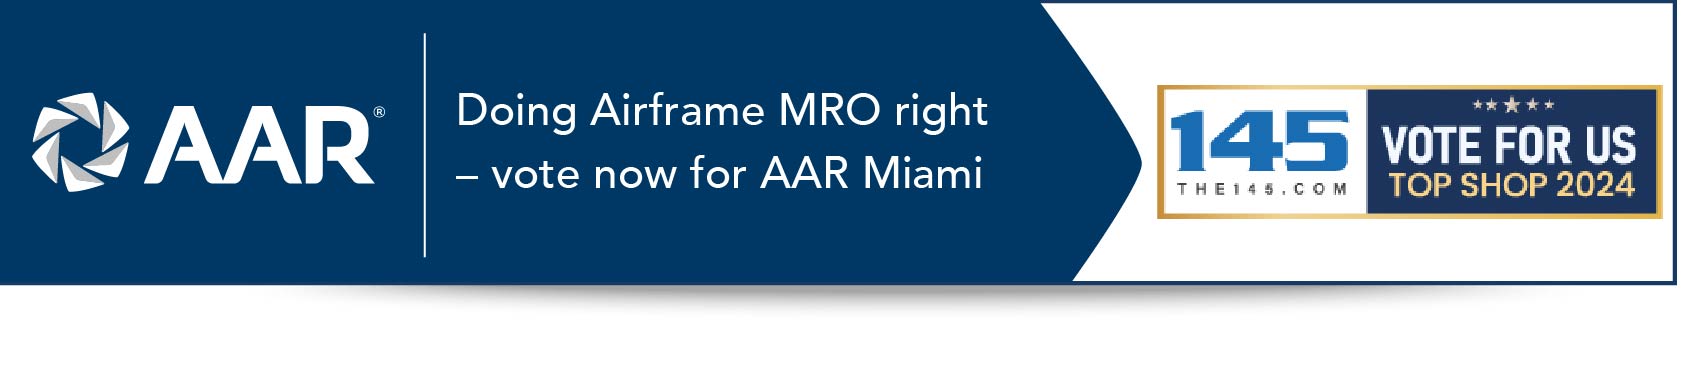 Vote for MRO Services - Miami as Your Top Shop